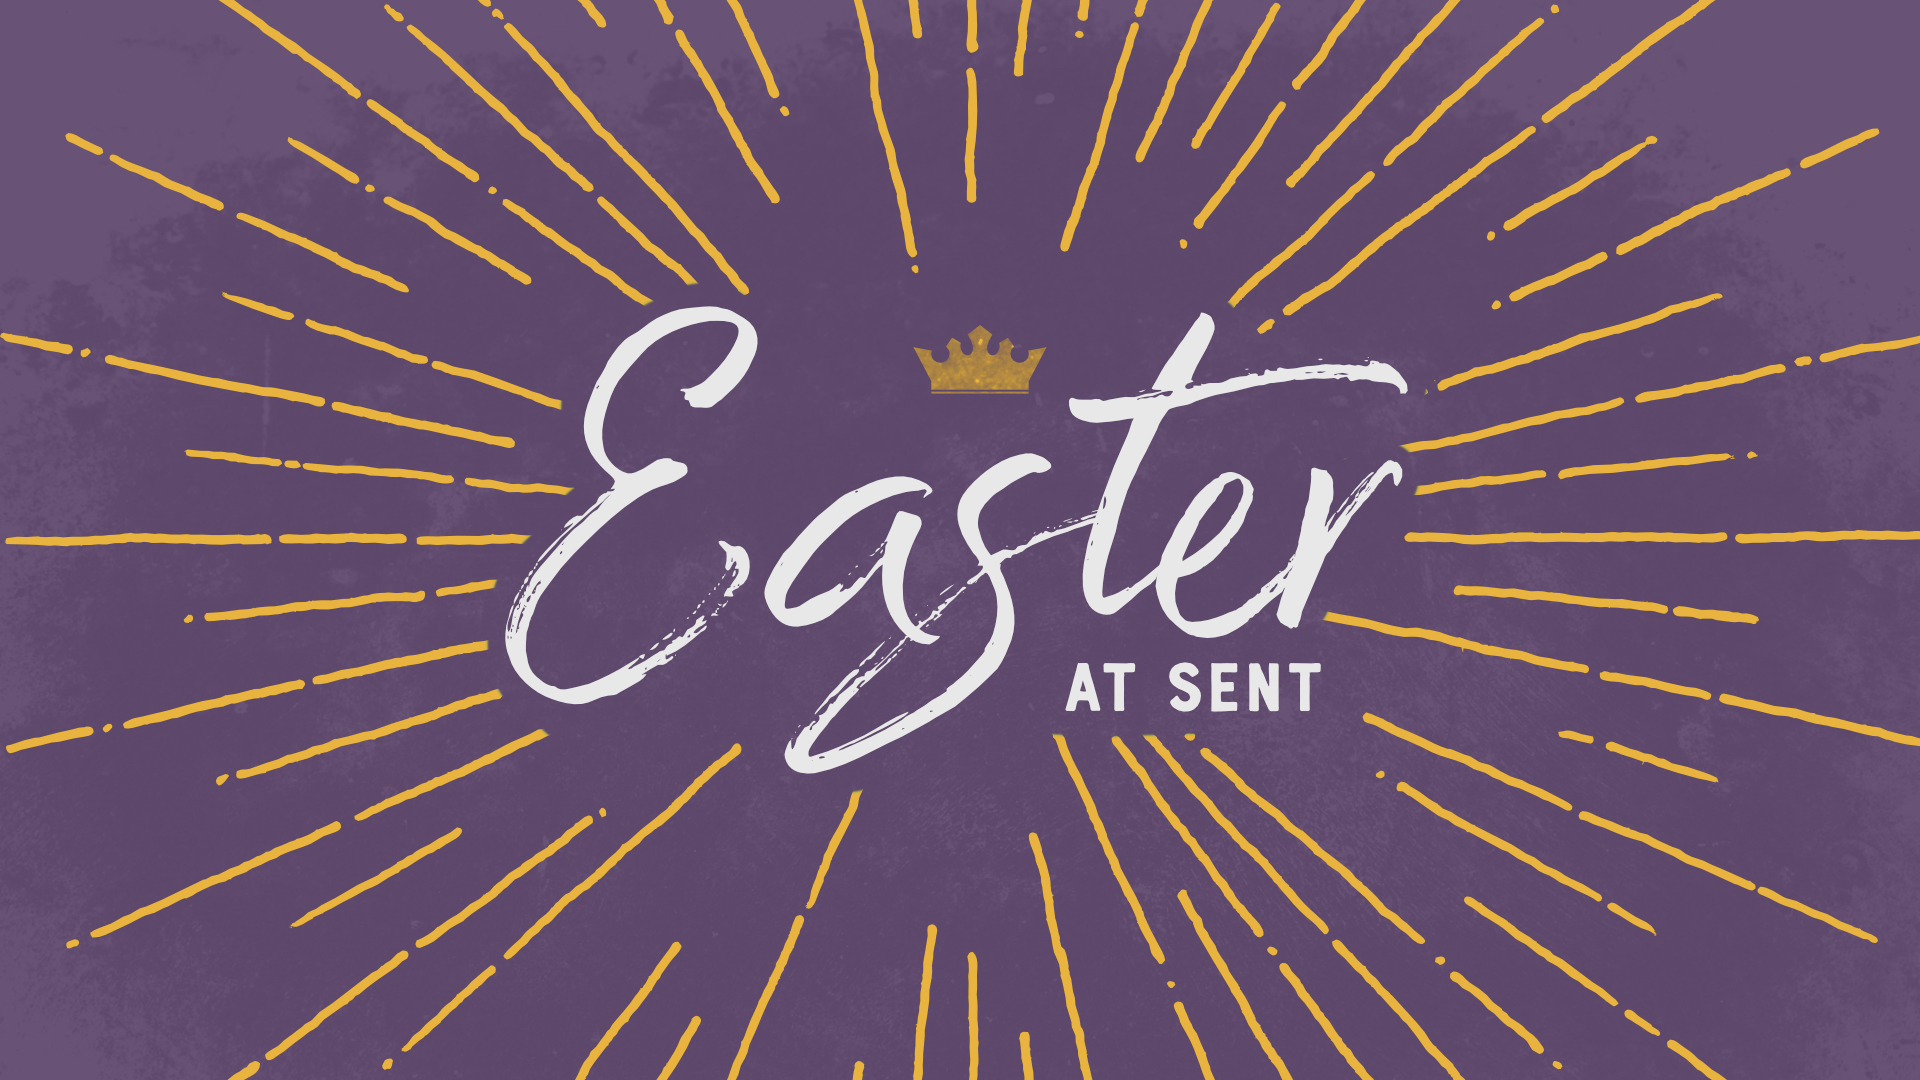 Easter 2020 at Sent